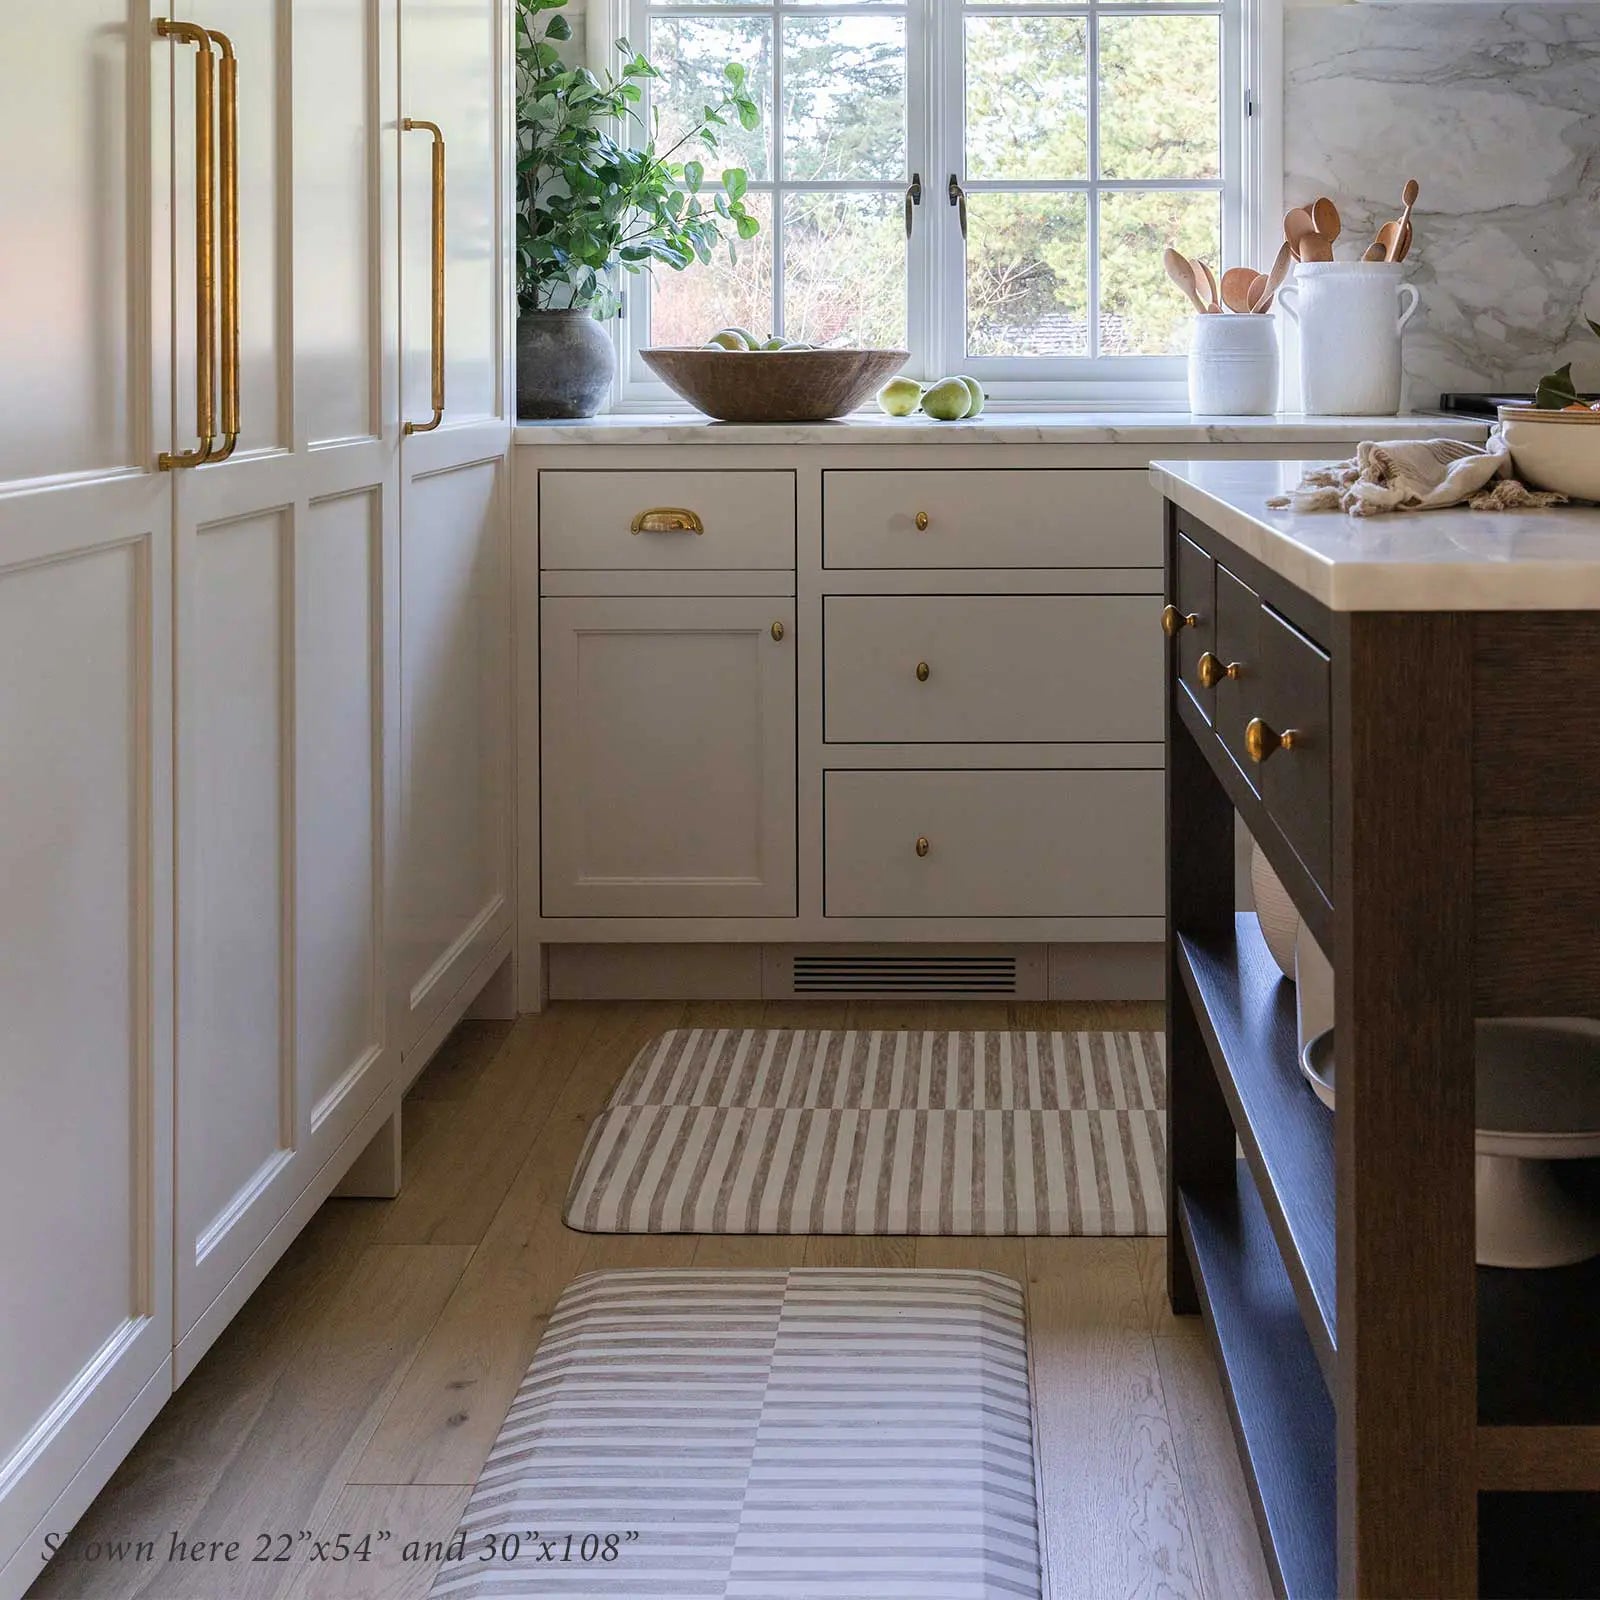 Reese chai beige and white inverted stripe standing mat in kitchen in sizes 22x54 and 30x108